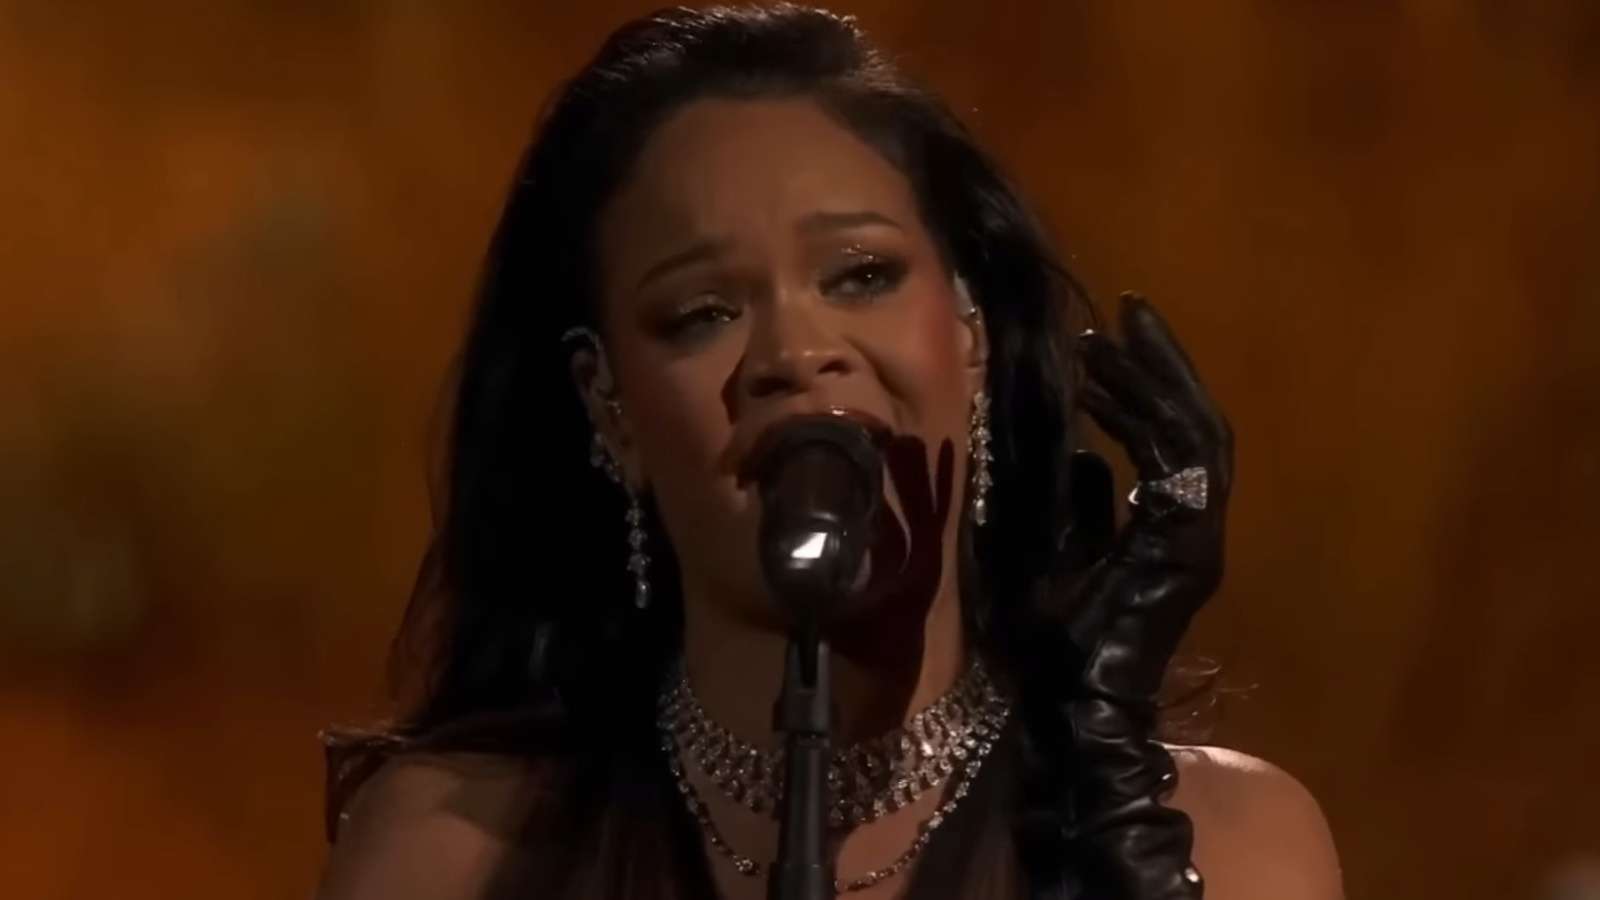 Rihanna performing onstage during an awards show